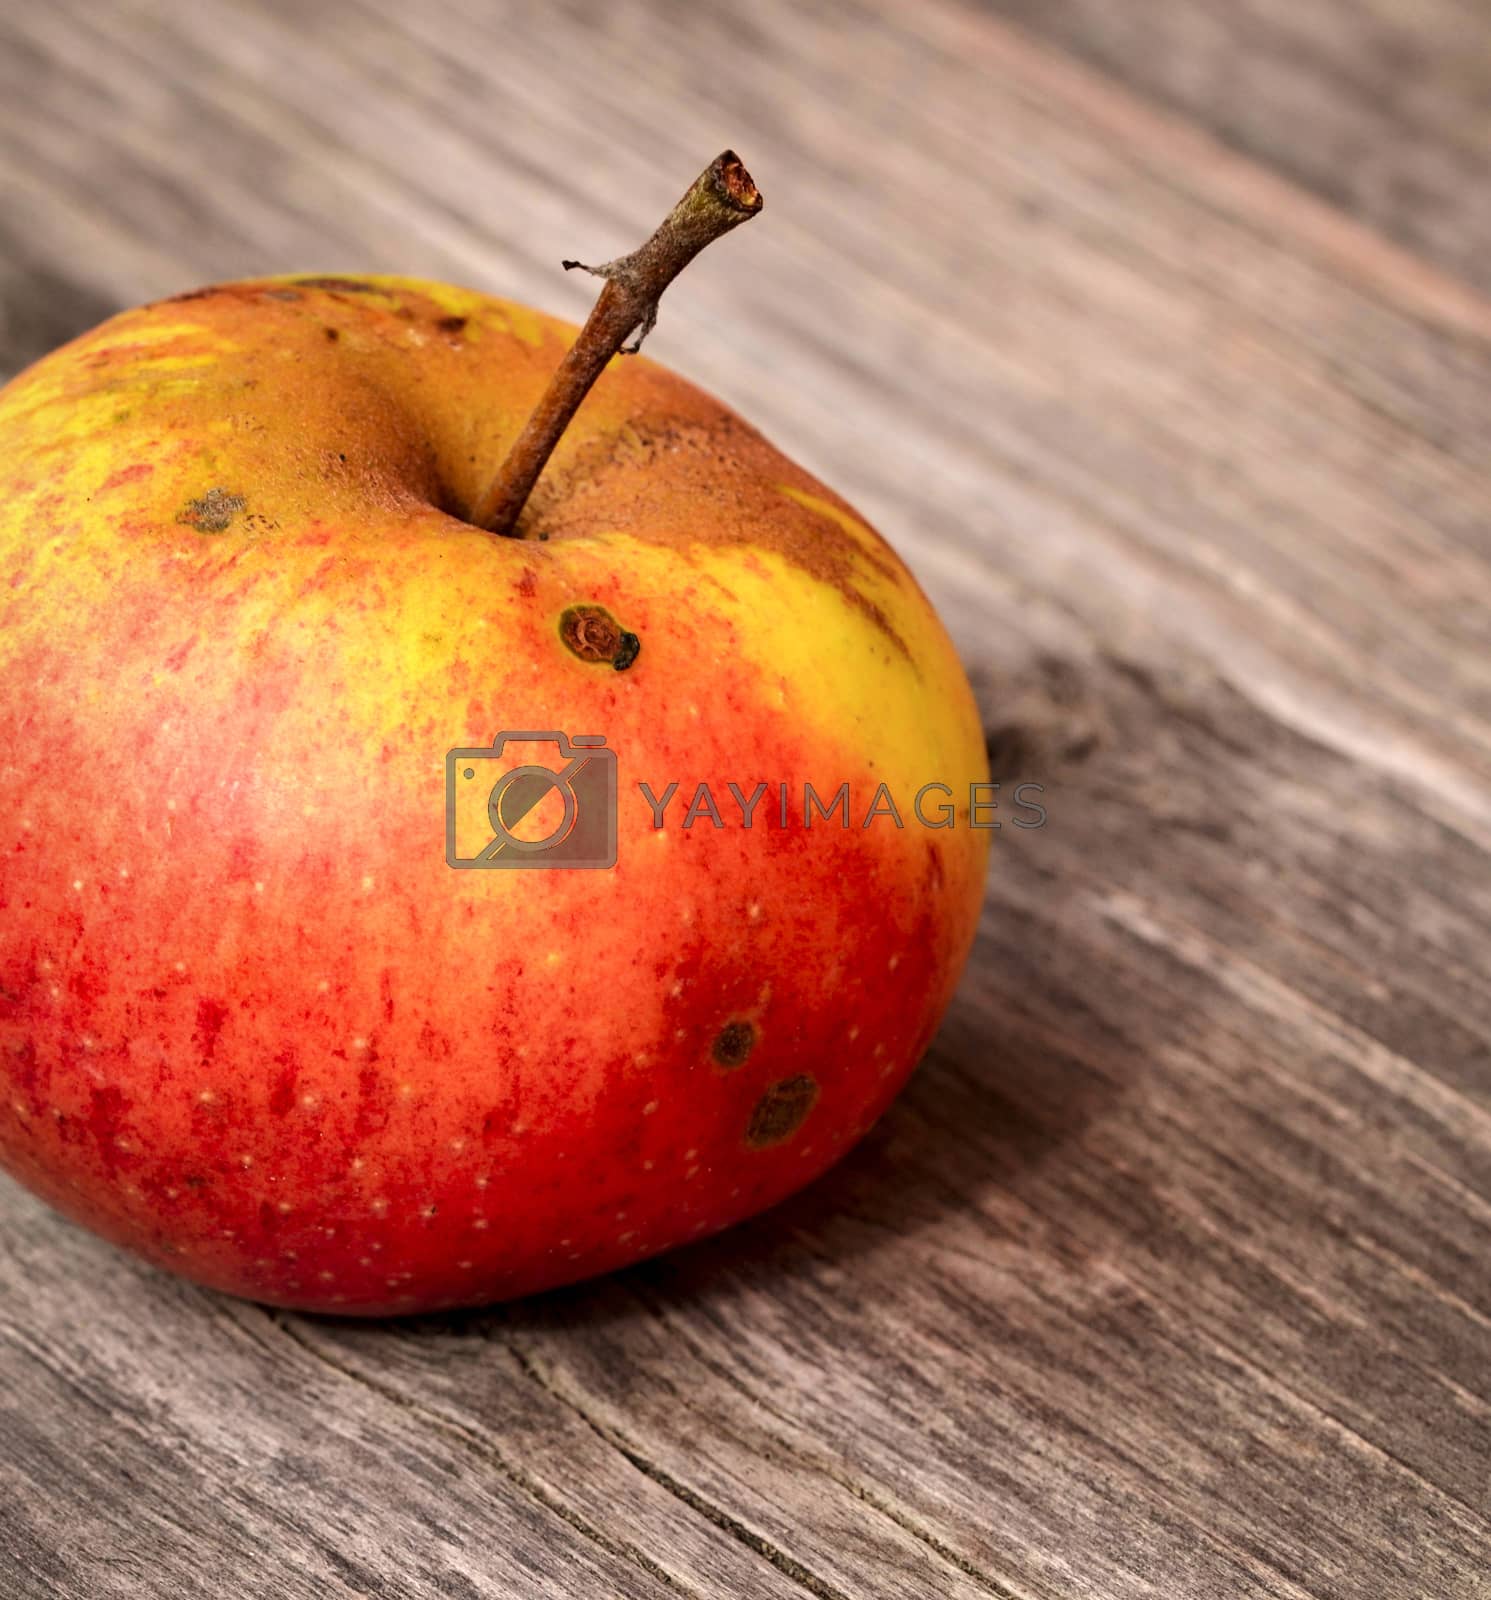 Royalty free image of one apple background by Ahojdoma